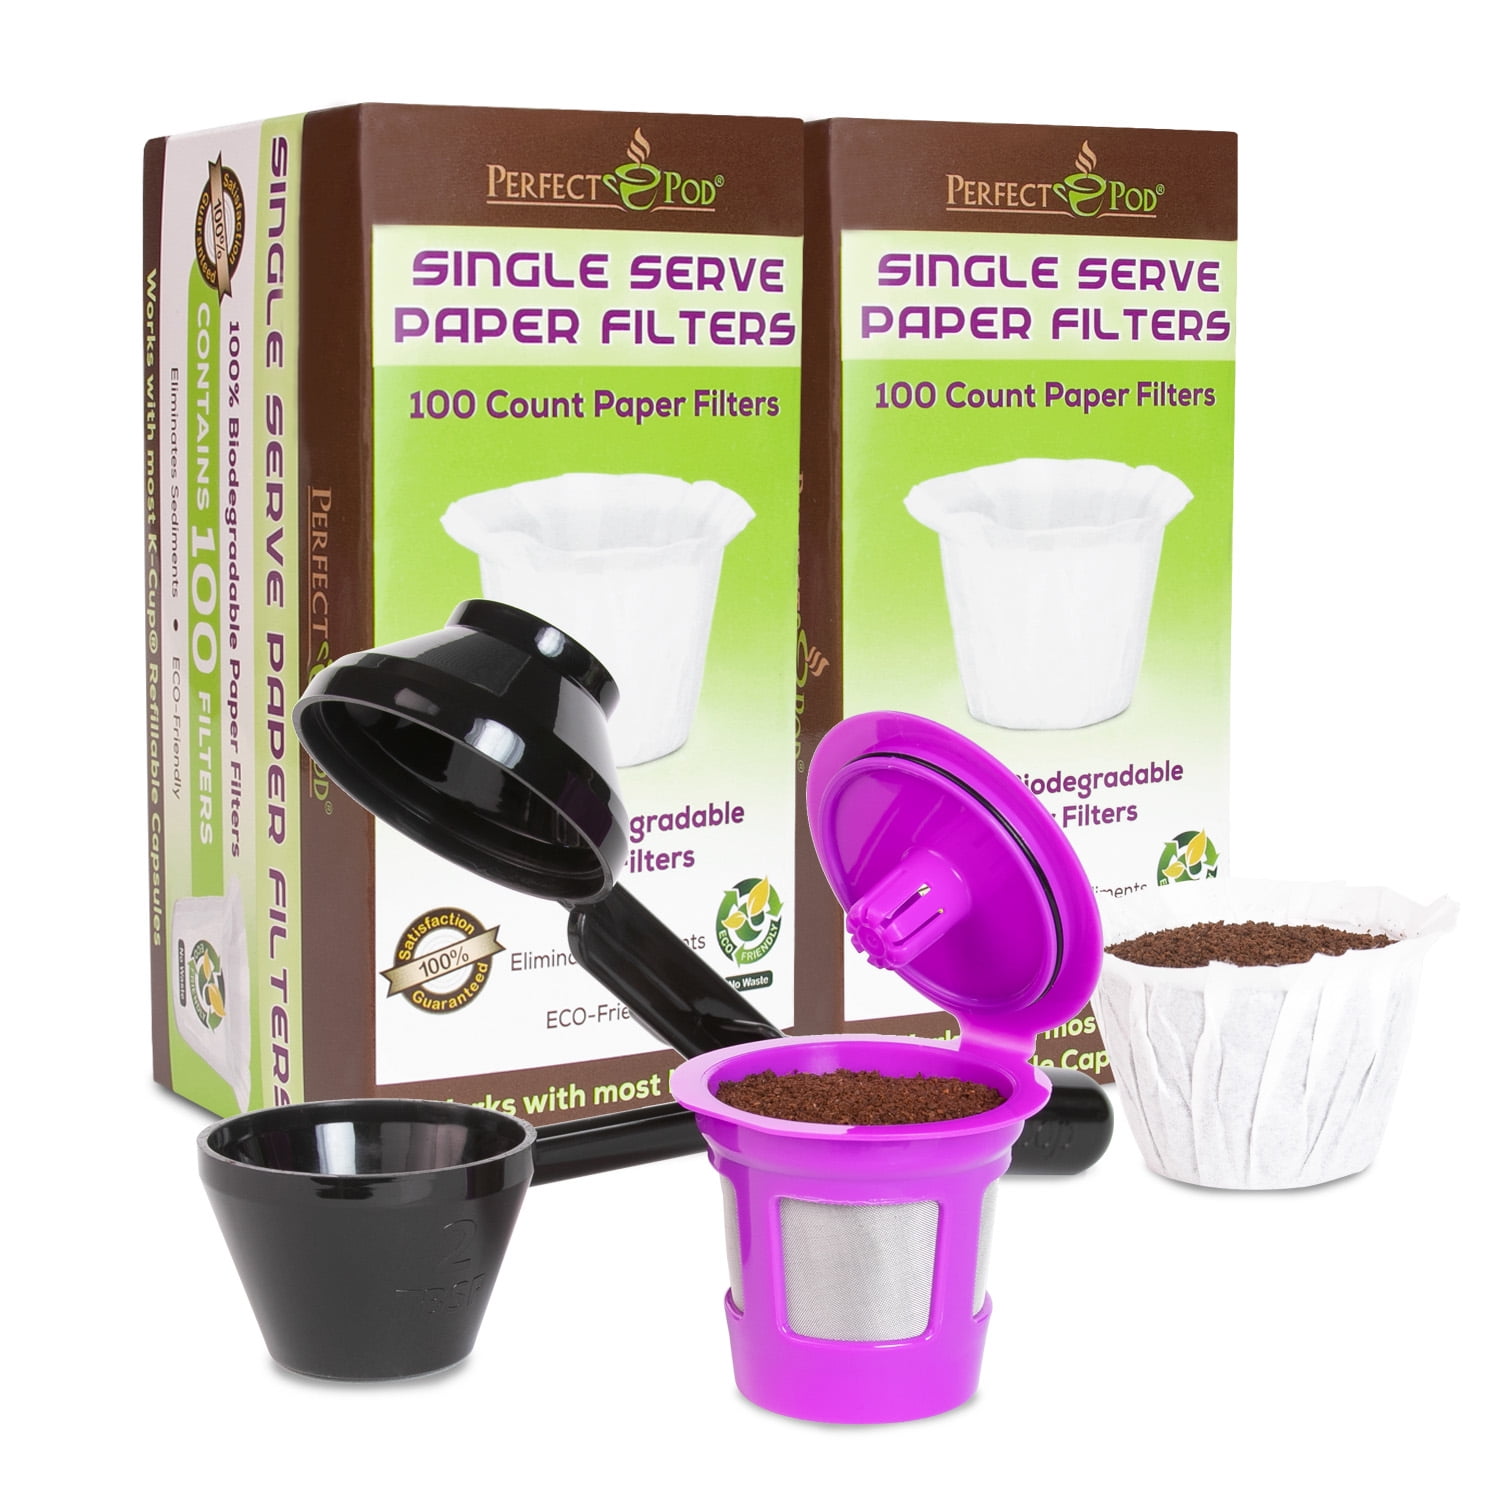 Perfect Pod Cafe Fill Value Pack with 2 Reusable K-Cup Pods +200 Cafe Filters Coffee Filters + EZ-Scoop Integrated Scoop with Funnel, Pink. Purple.